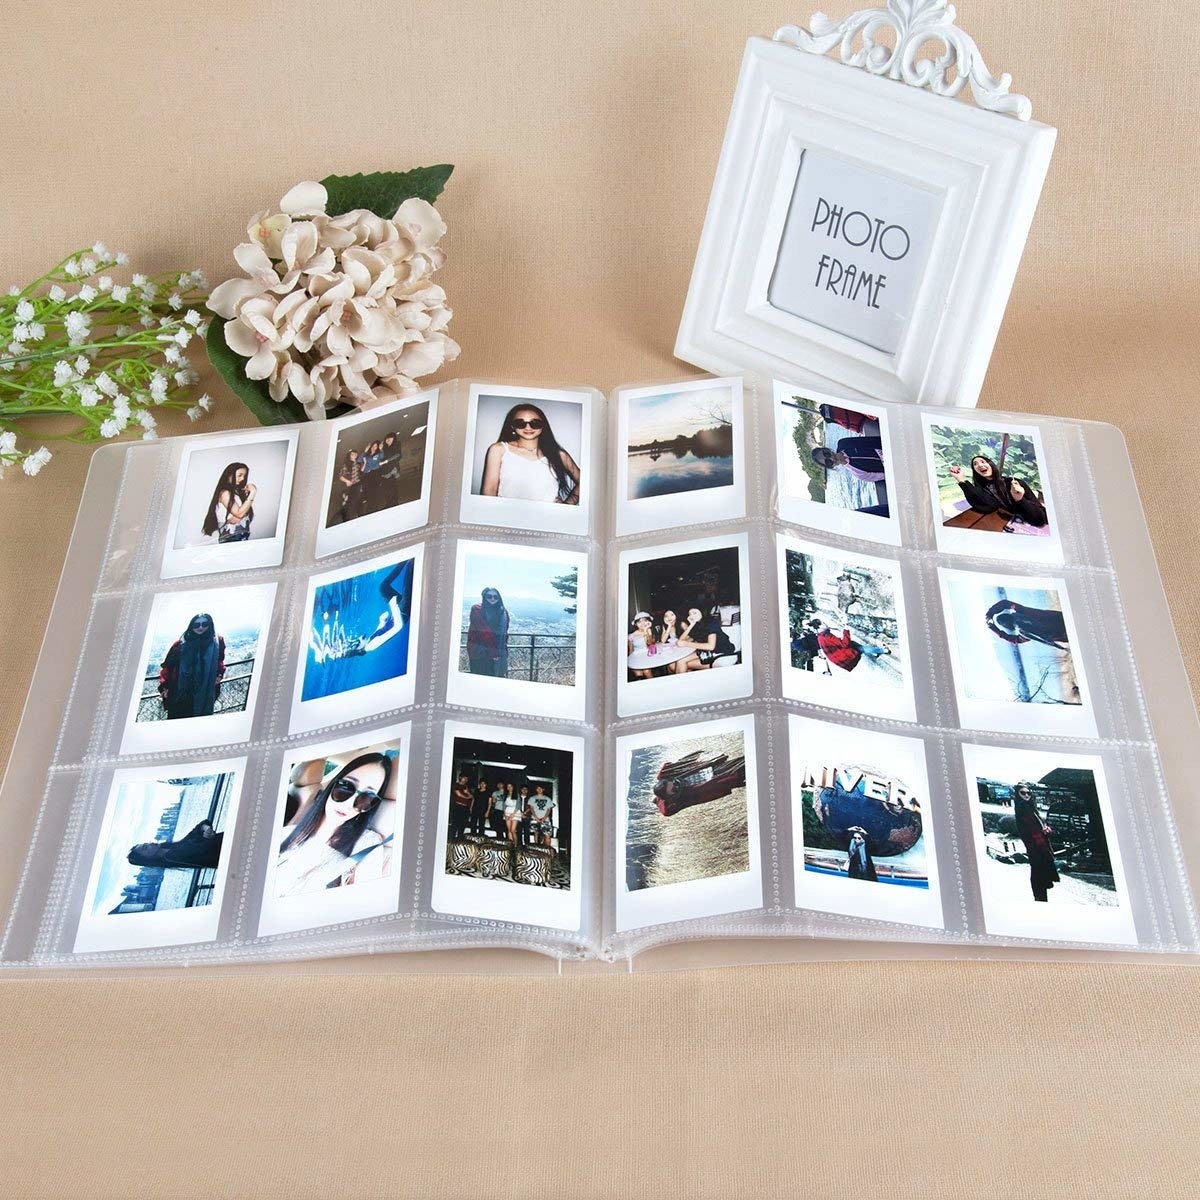 9 Clever Uses for Photo Albums